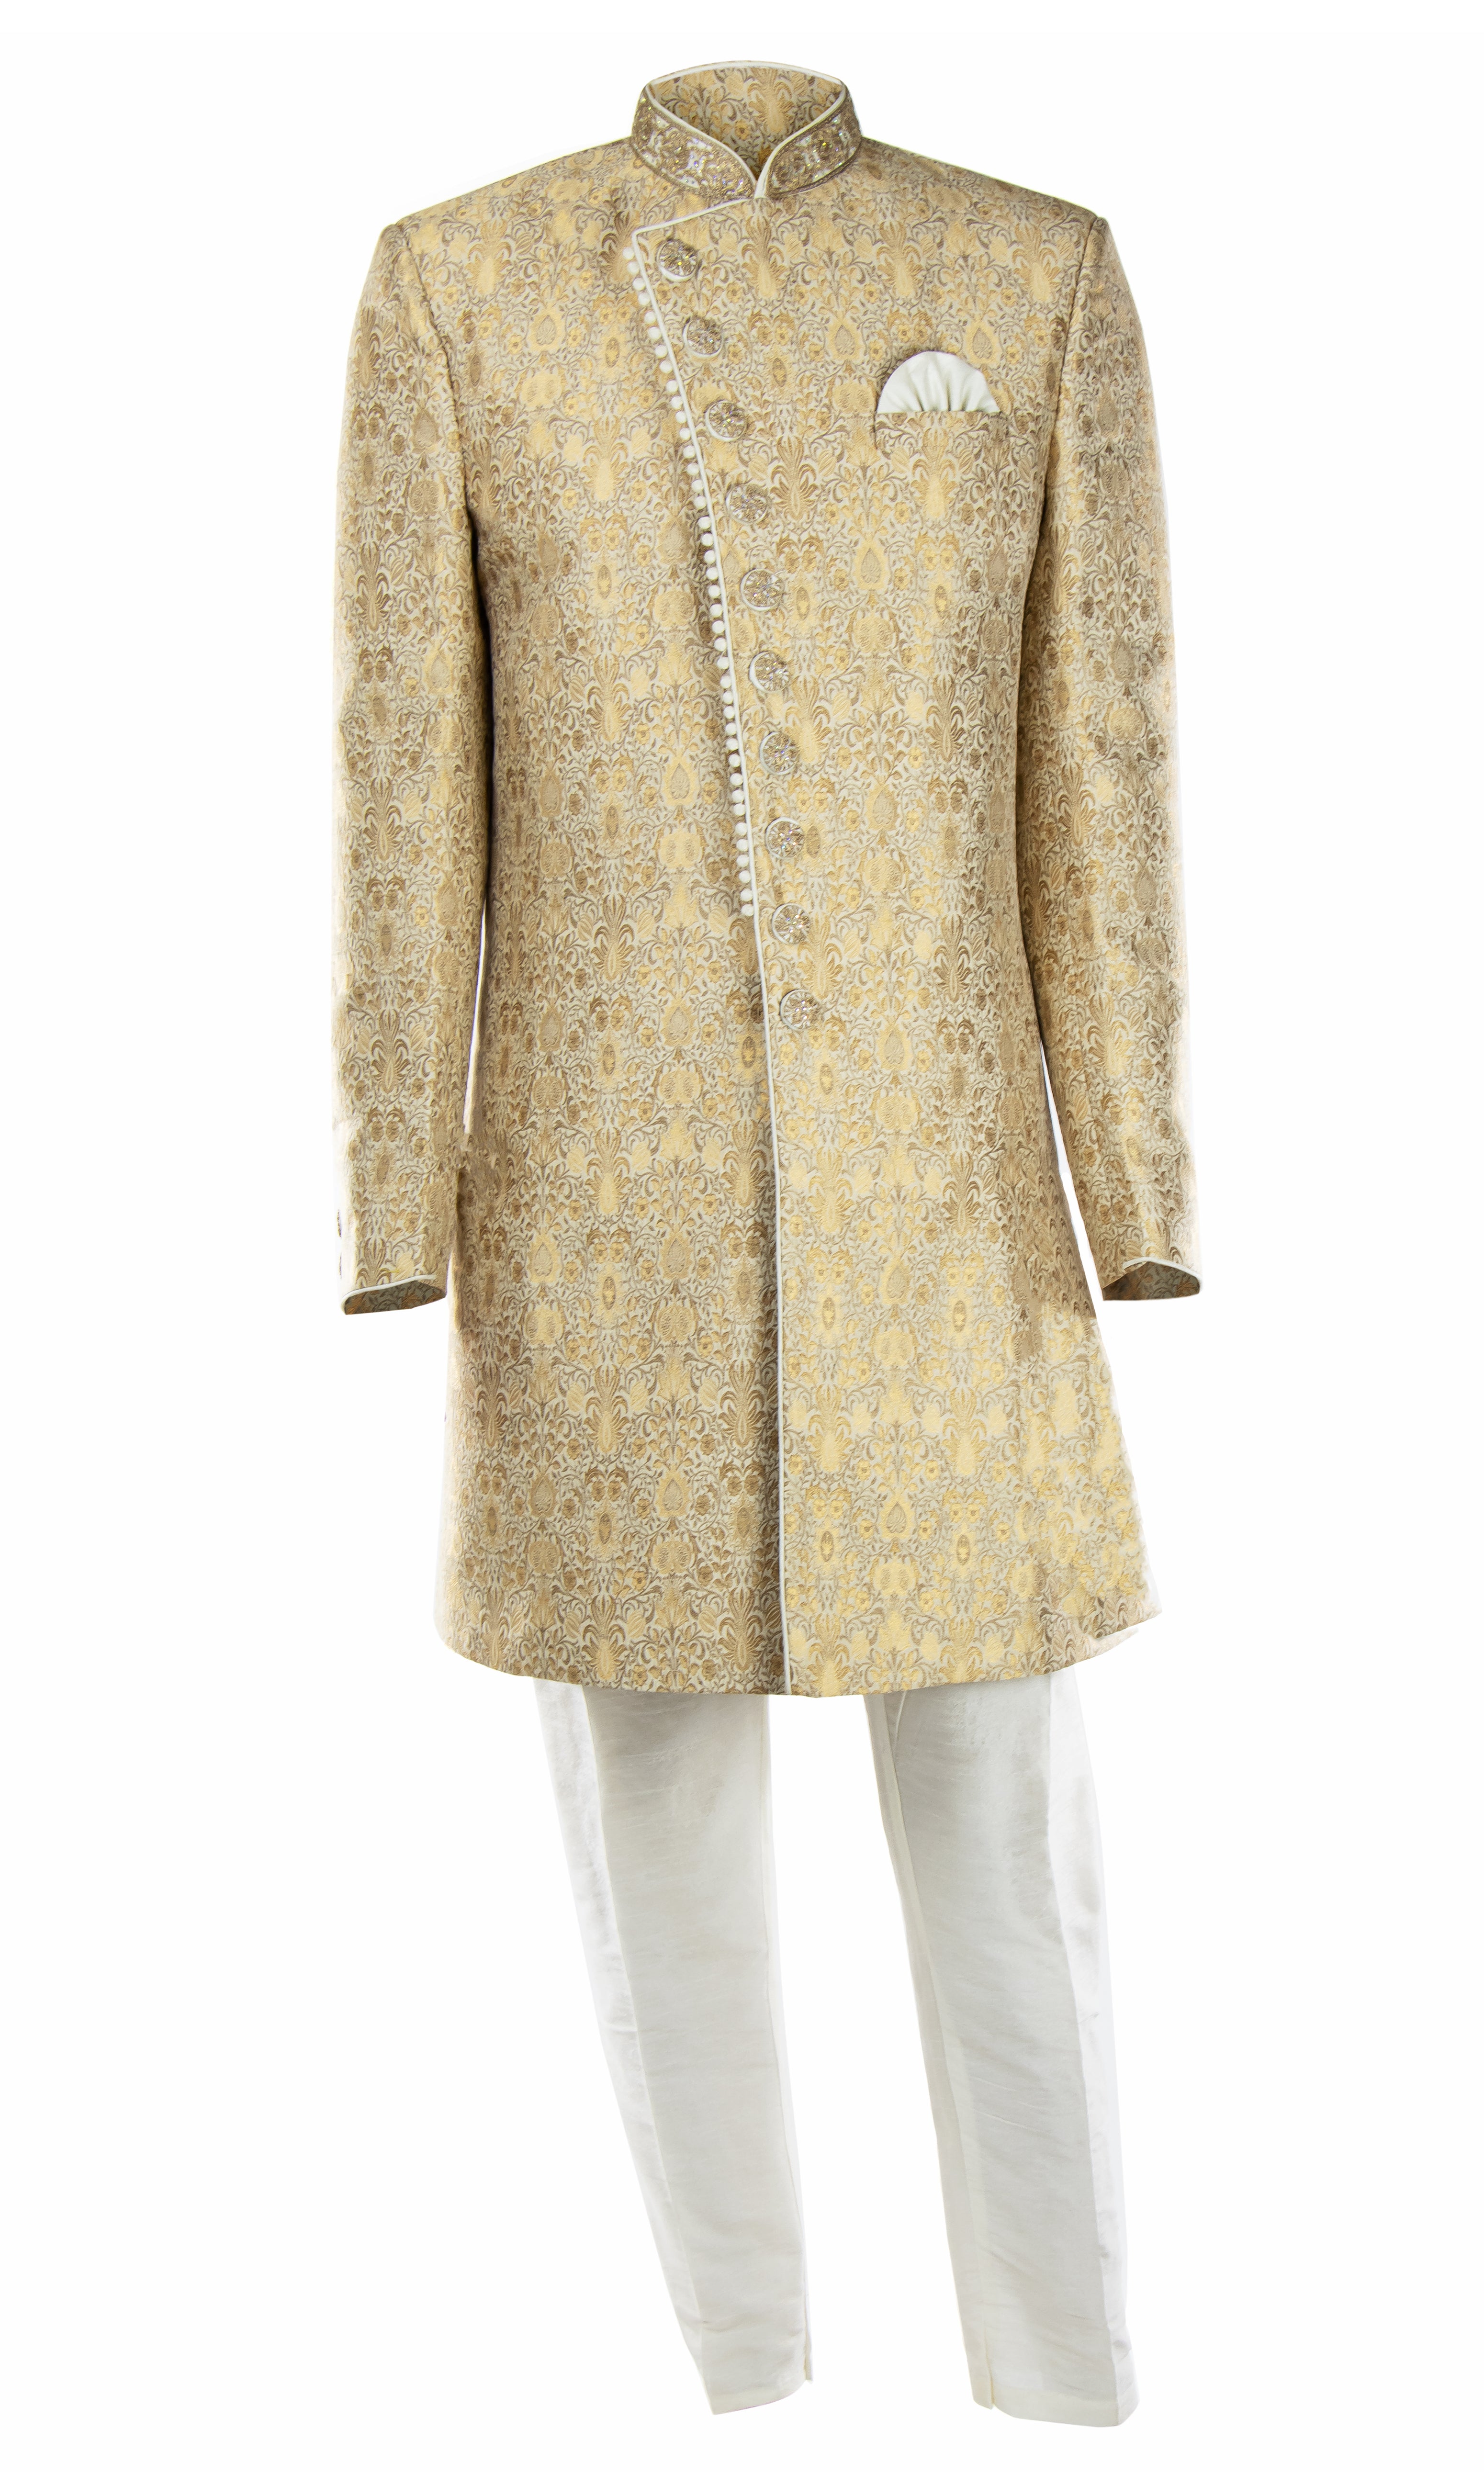 Gold silk Sherwani features an elegant jacquard foliage pattern and an asymmetrical button closure.This Sherwani will look just as good paired with your own tailored dress pants.